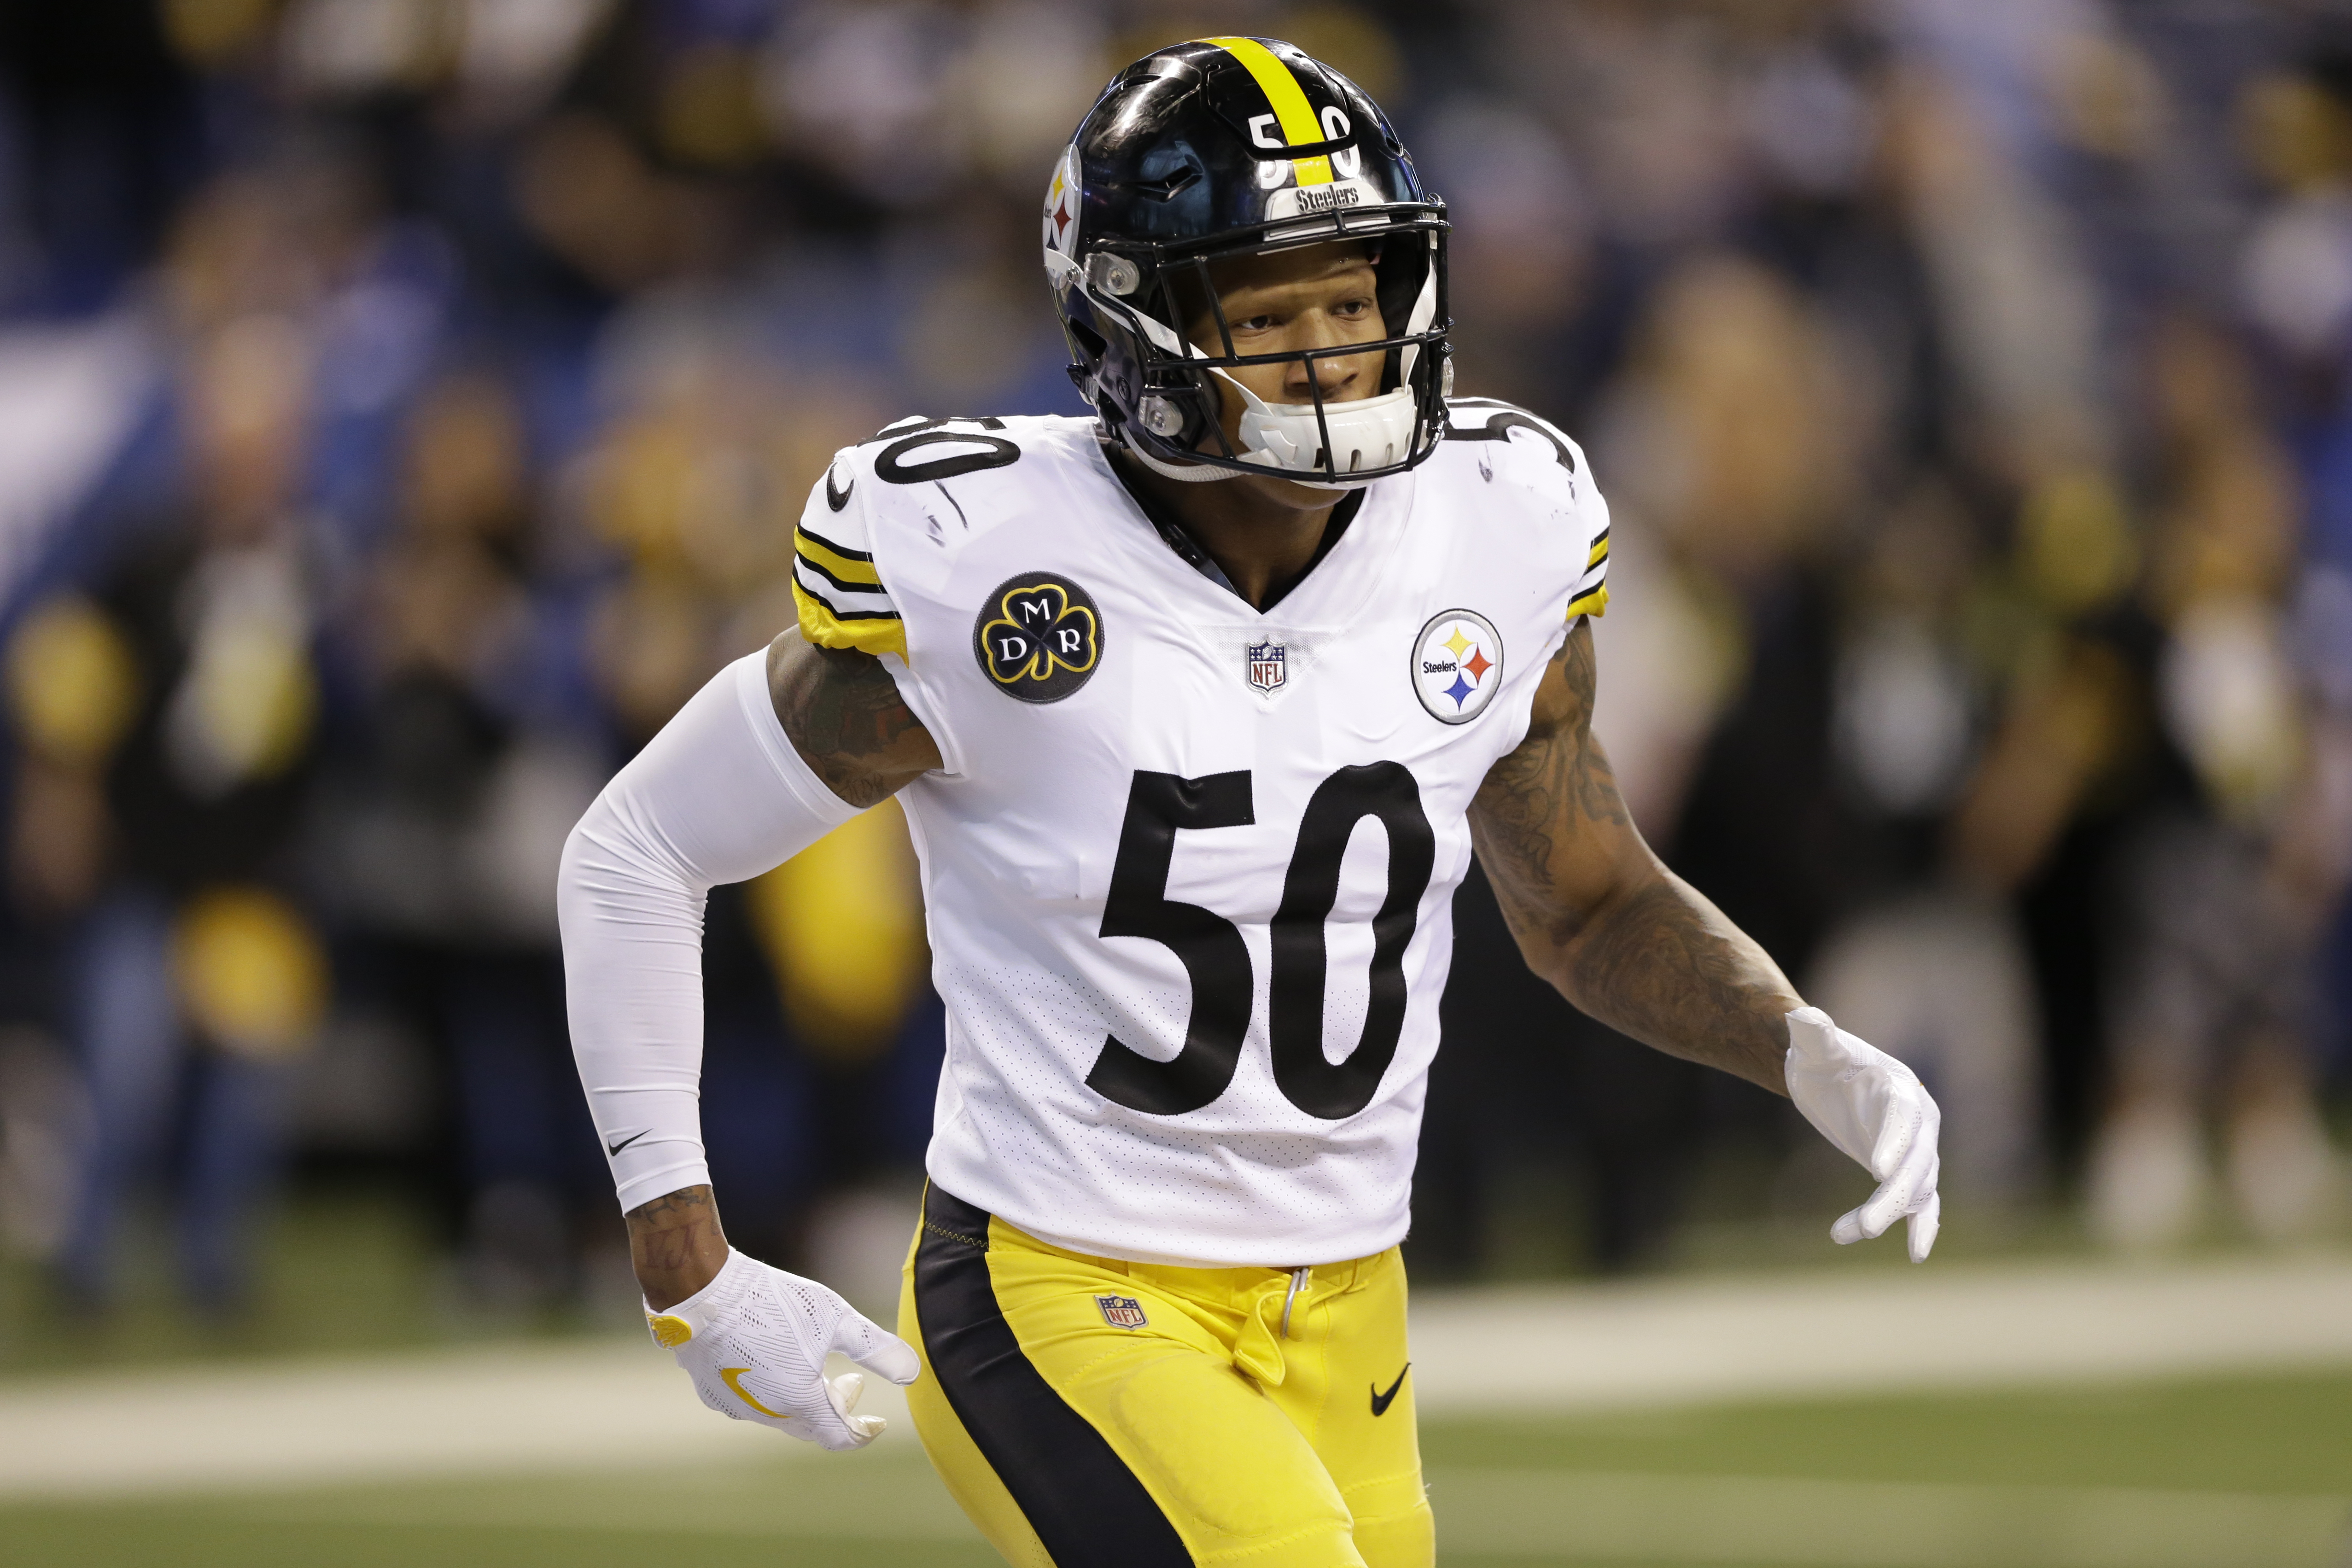 Almost 5 Years After Devastating Injury, Steelers Ryan Shazier